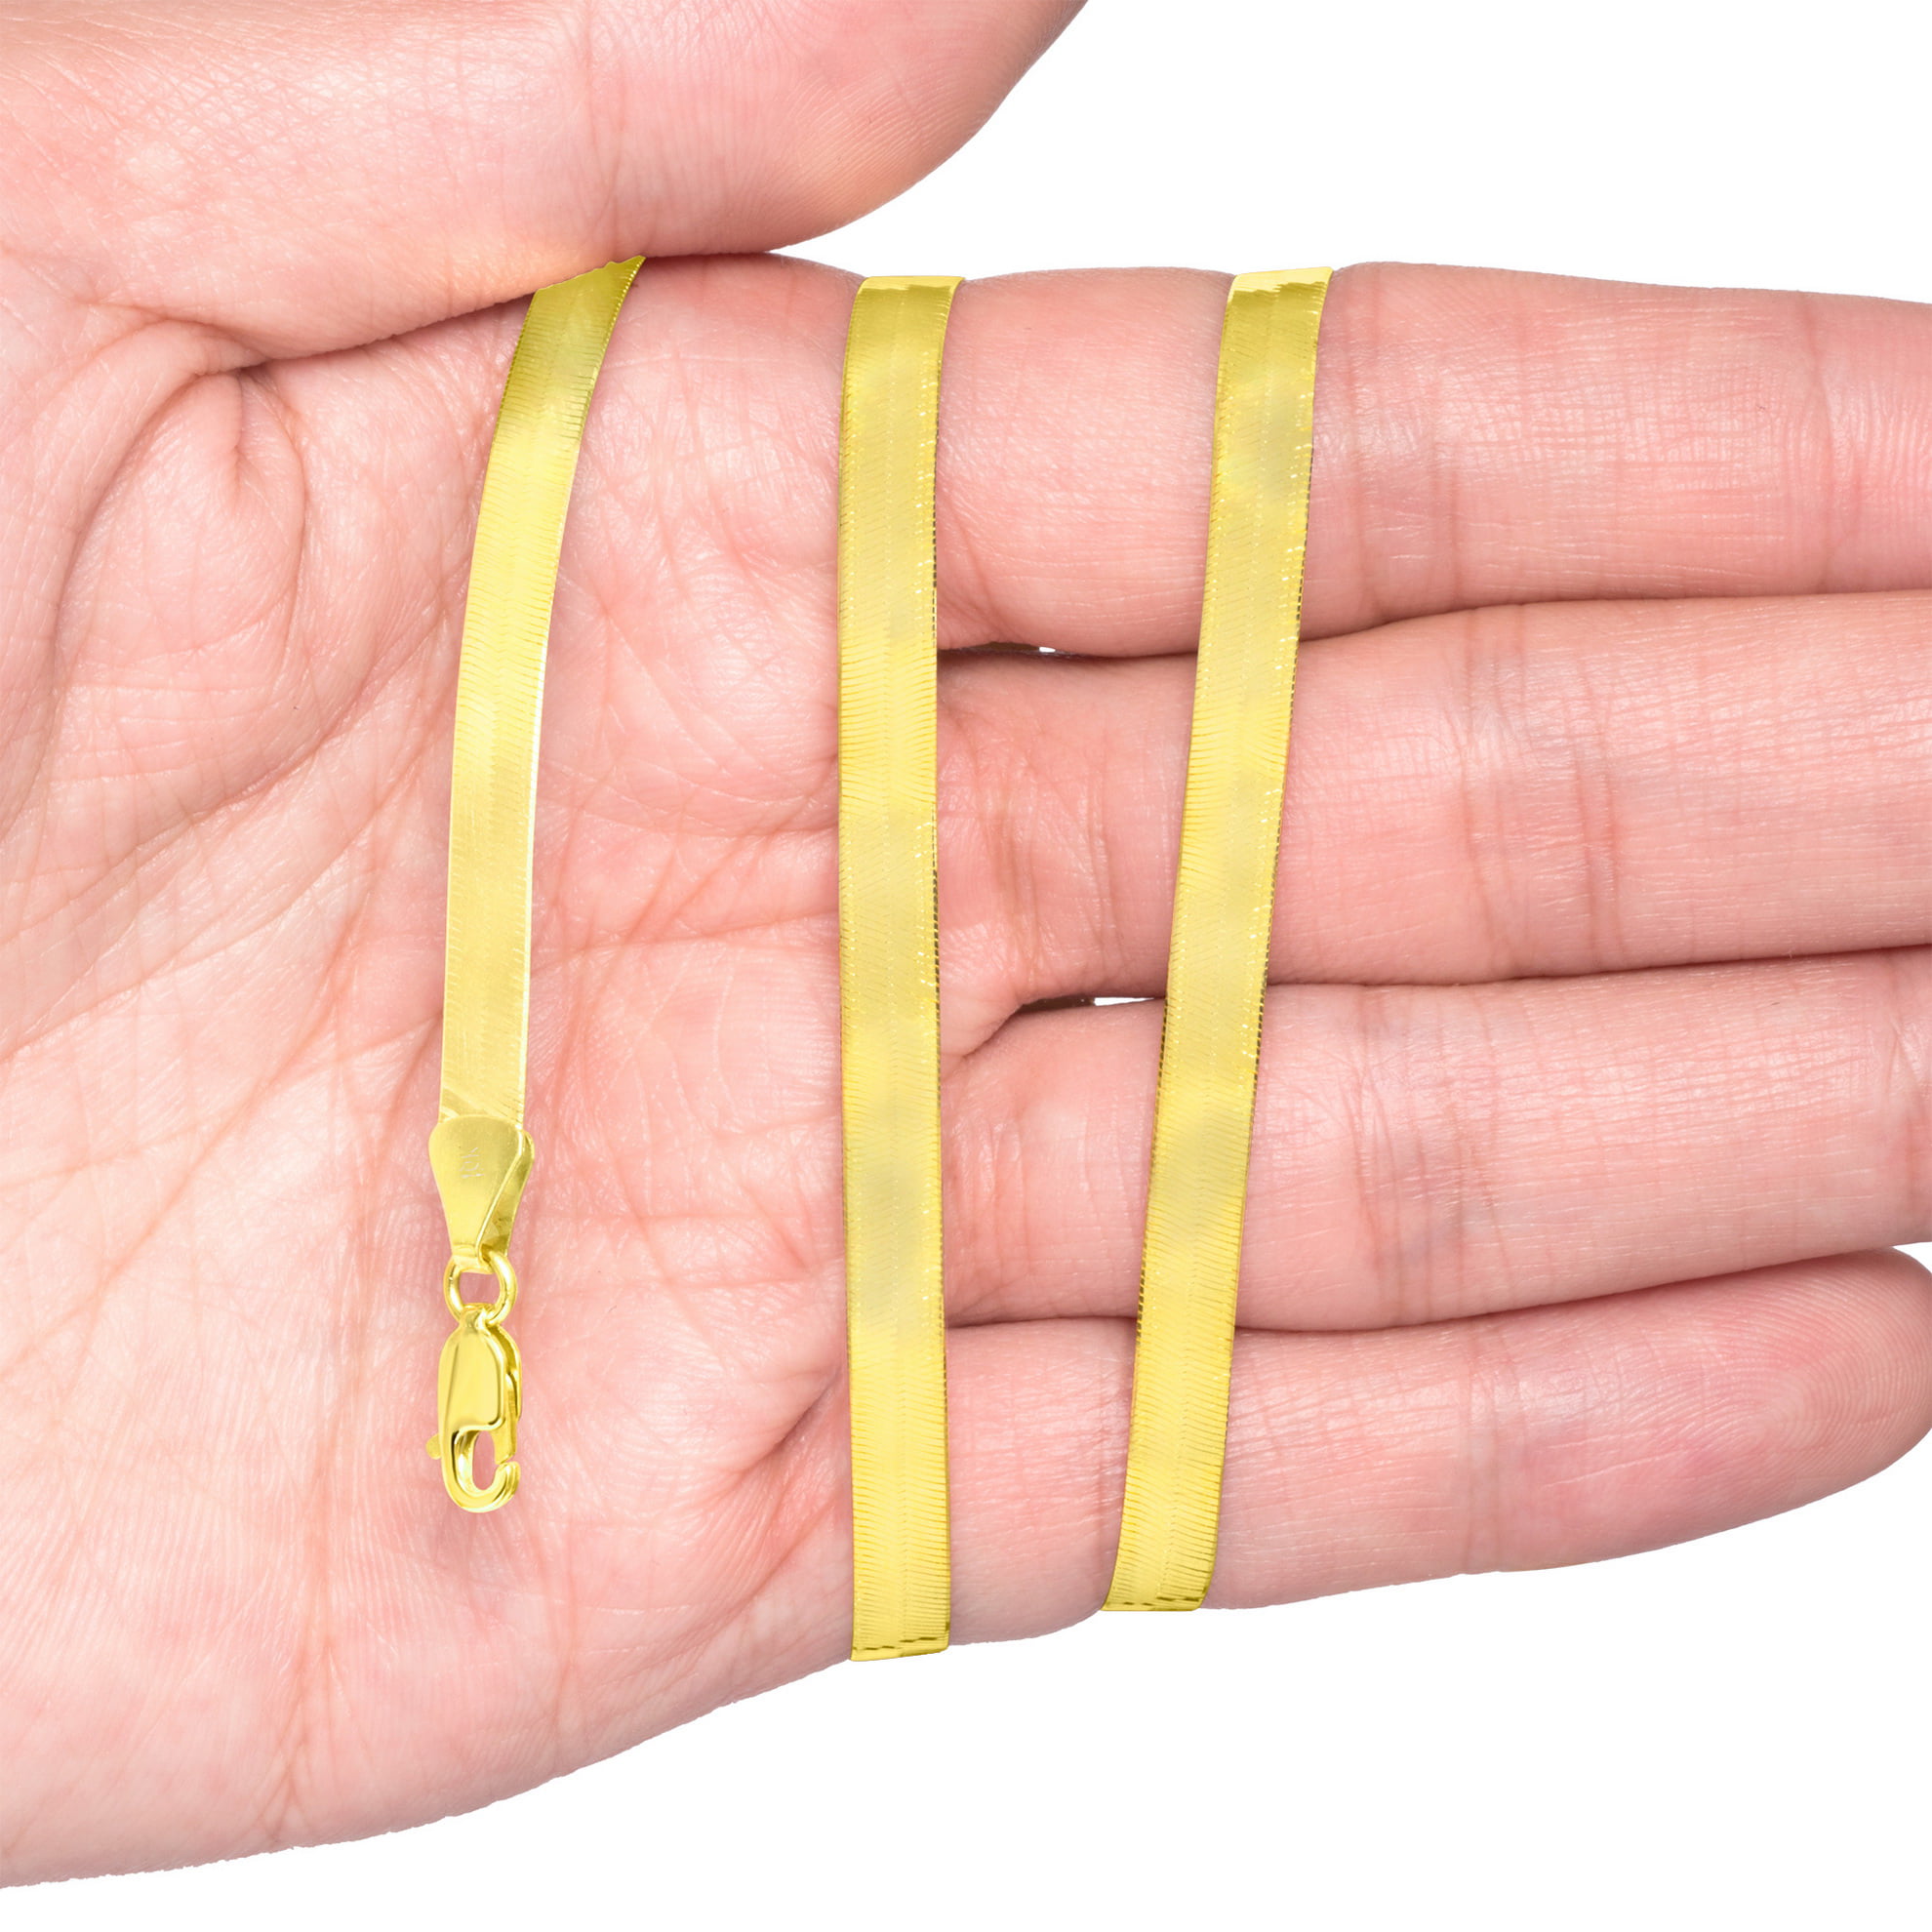 with Secure Lobster Lock Clasp Solid 10k Yellow Gold 5.0mm Silky Herringbone Chain Necklace